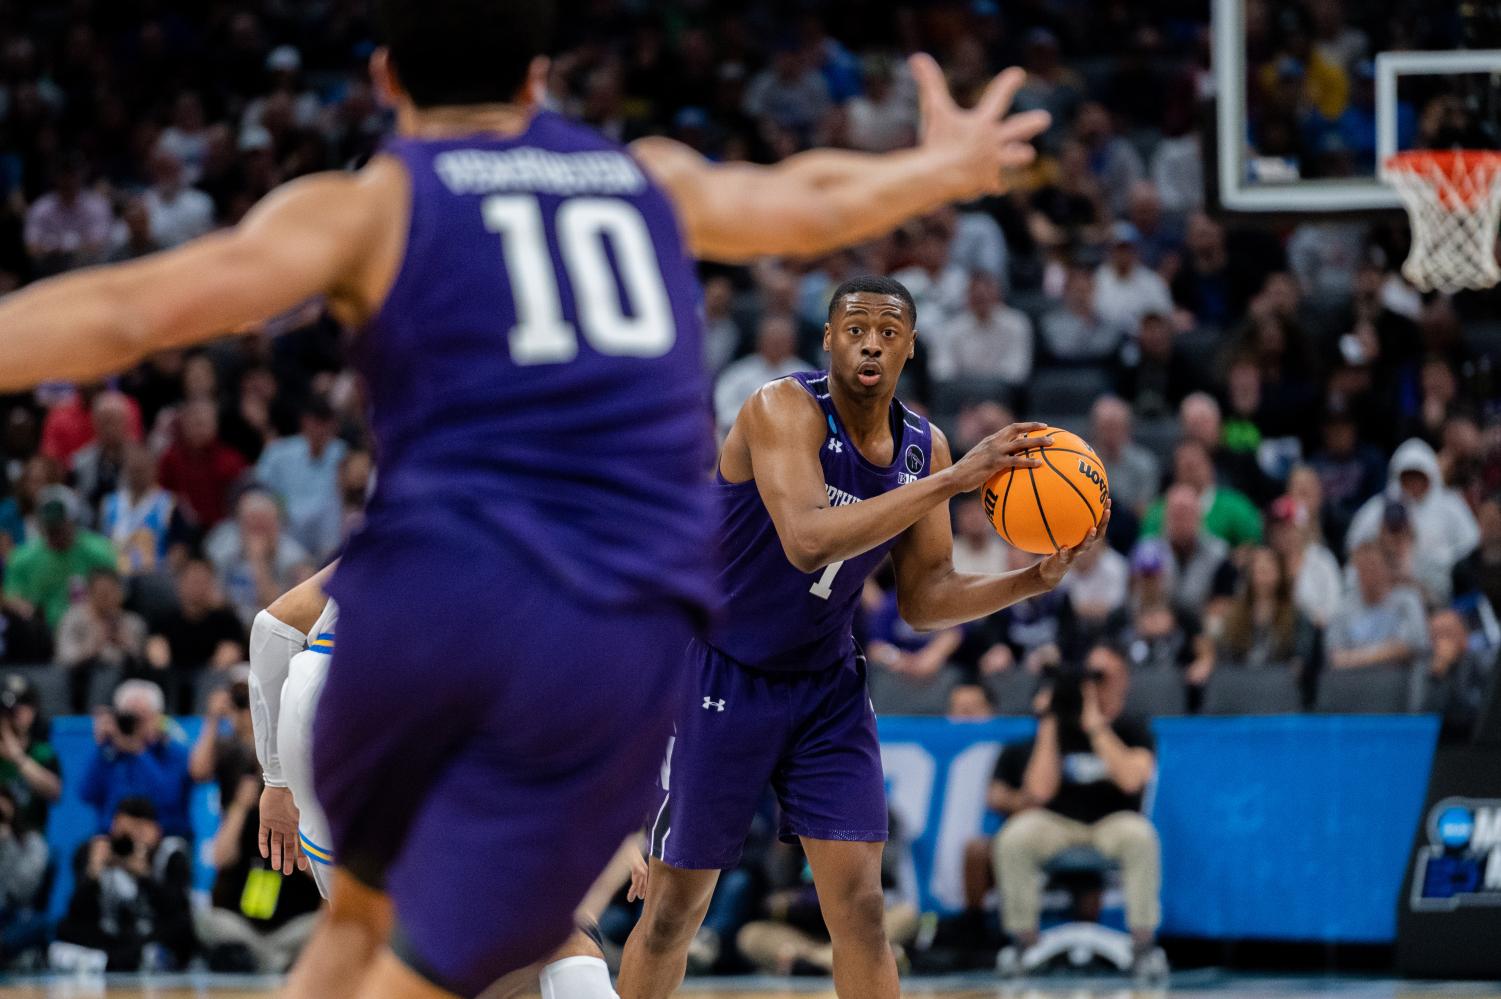 A basketball player in a purple jersey passes the ball to a player in a purple jersey in front of them.